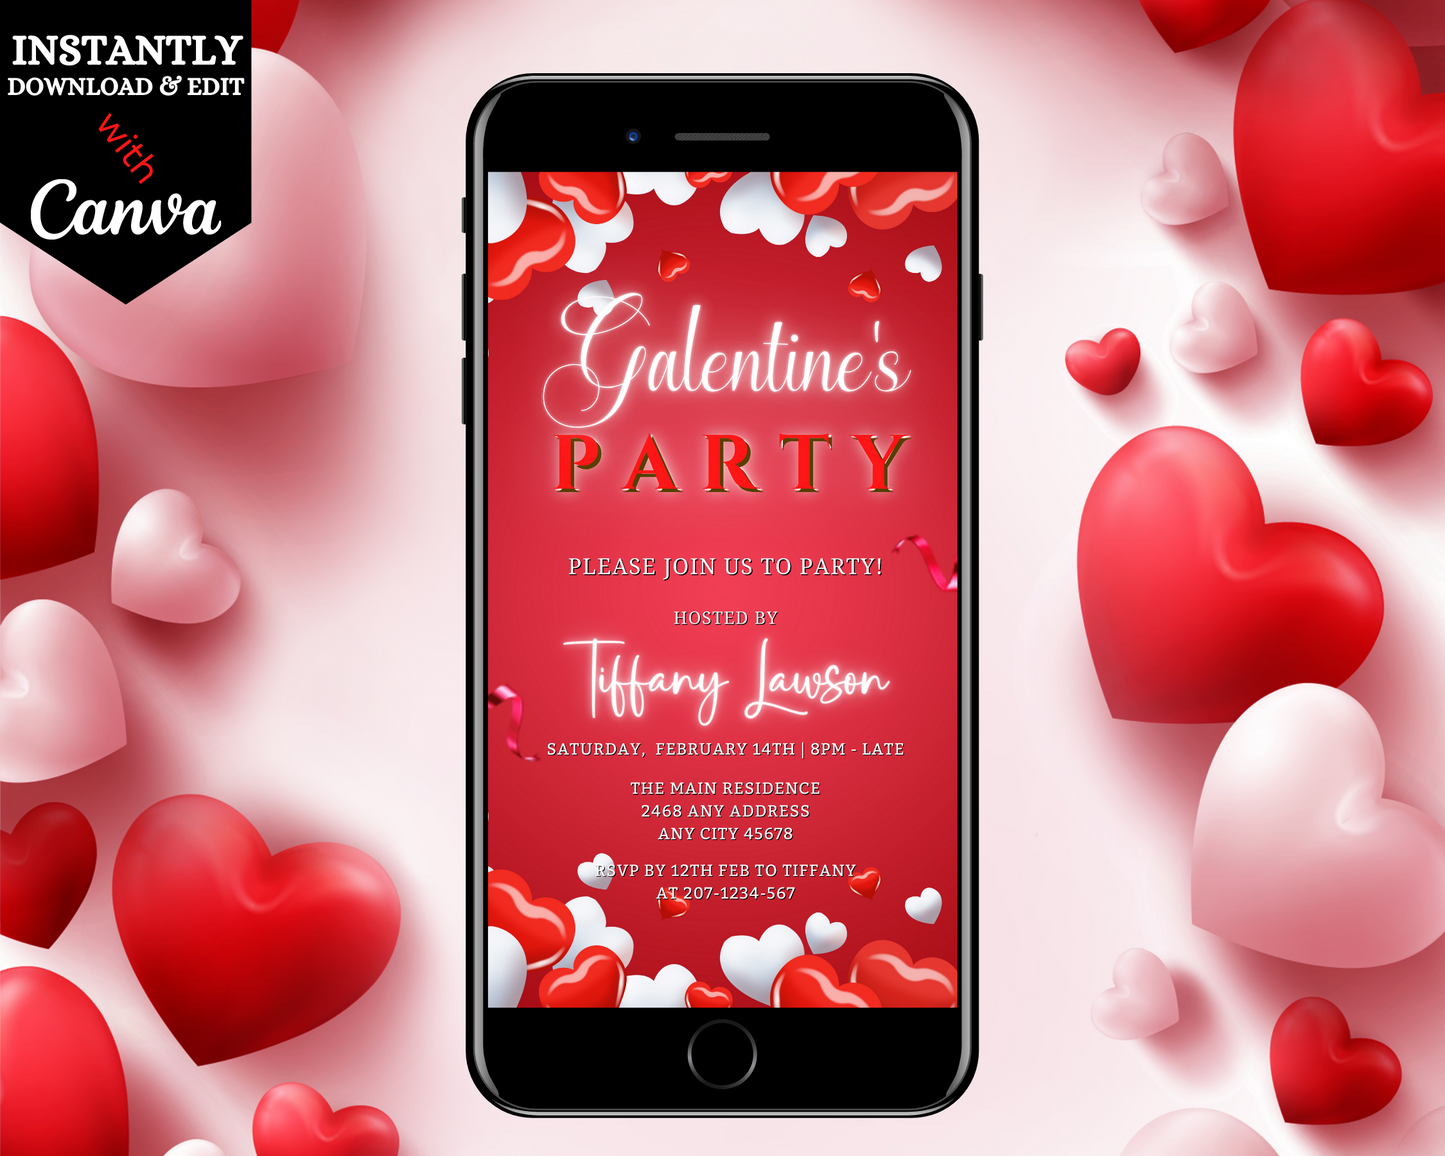 Editable Red White Border Hearts Galentines Party Evite displayed on a smartphone screen, surrounded by heart graphics, ready for customization and digital sharing.